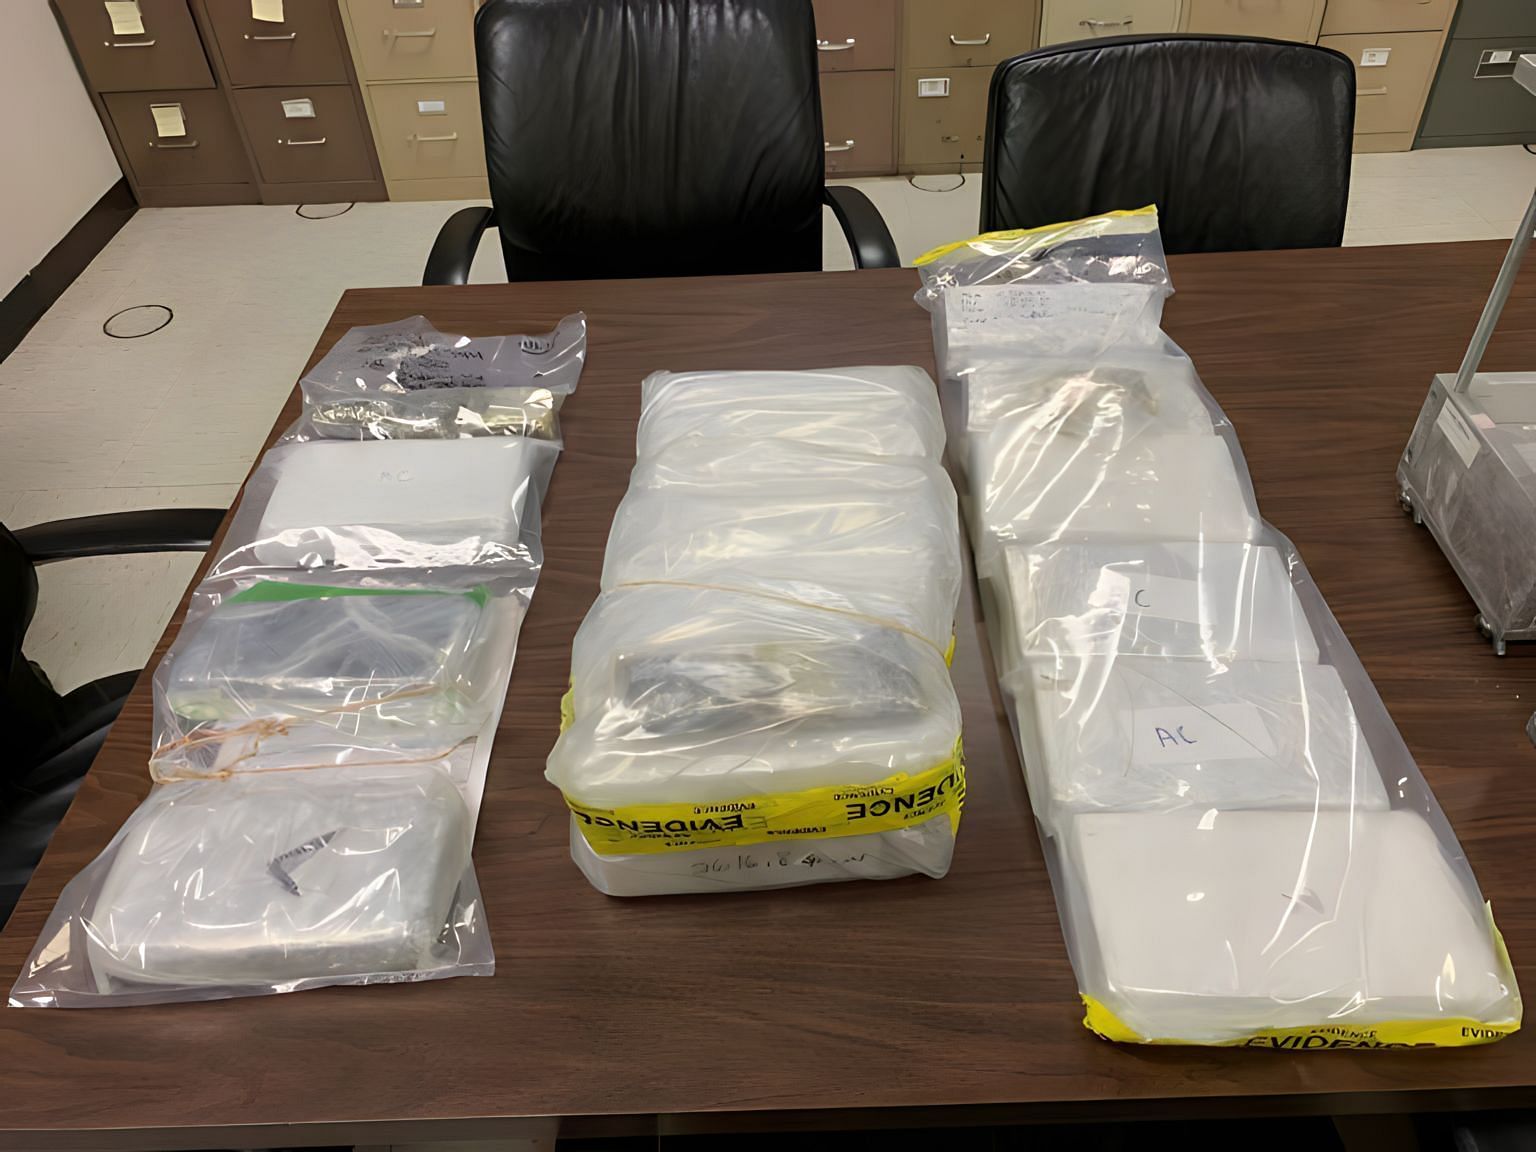 FBI found cocaine and other drugs in an investigation (Image via Suffolk County District Attorney/MEGA)